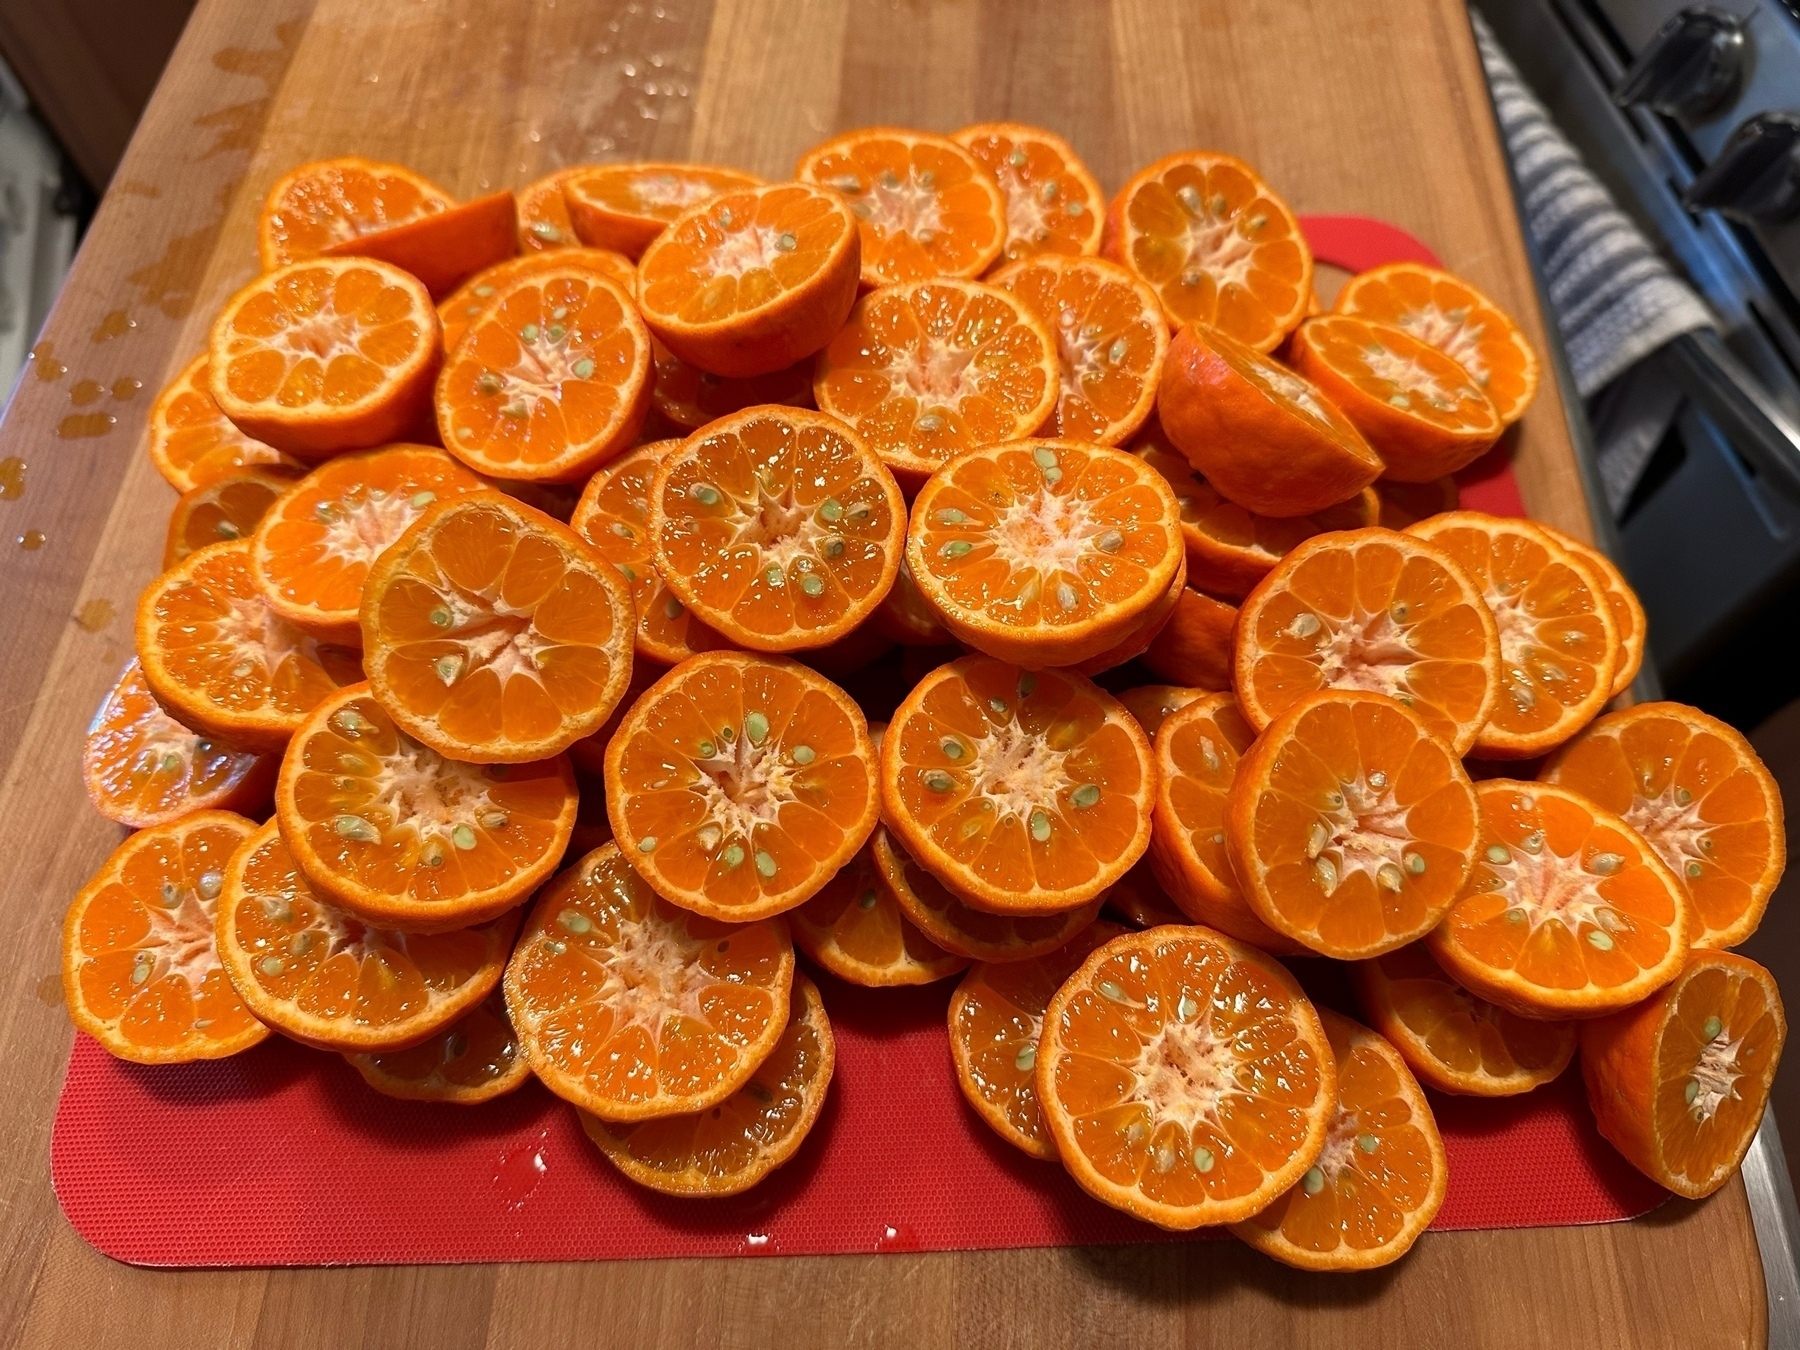 a pile of halved mandarins, cut side up, on a red cutting board.